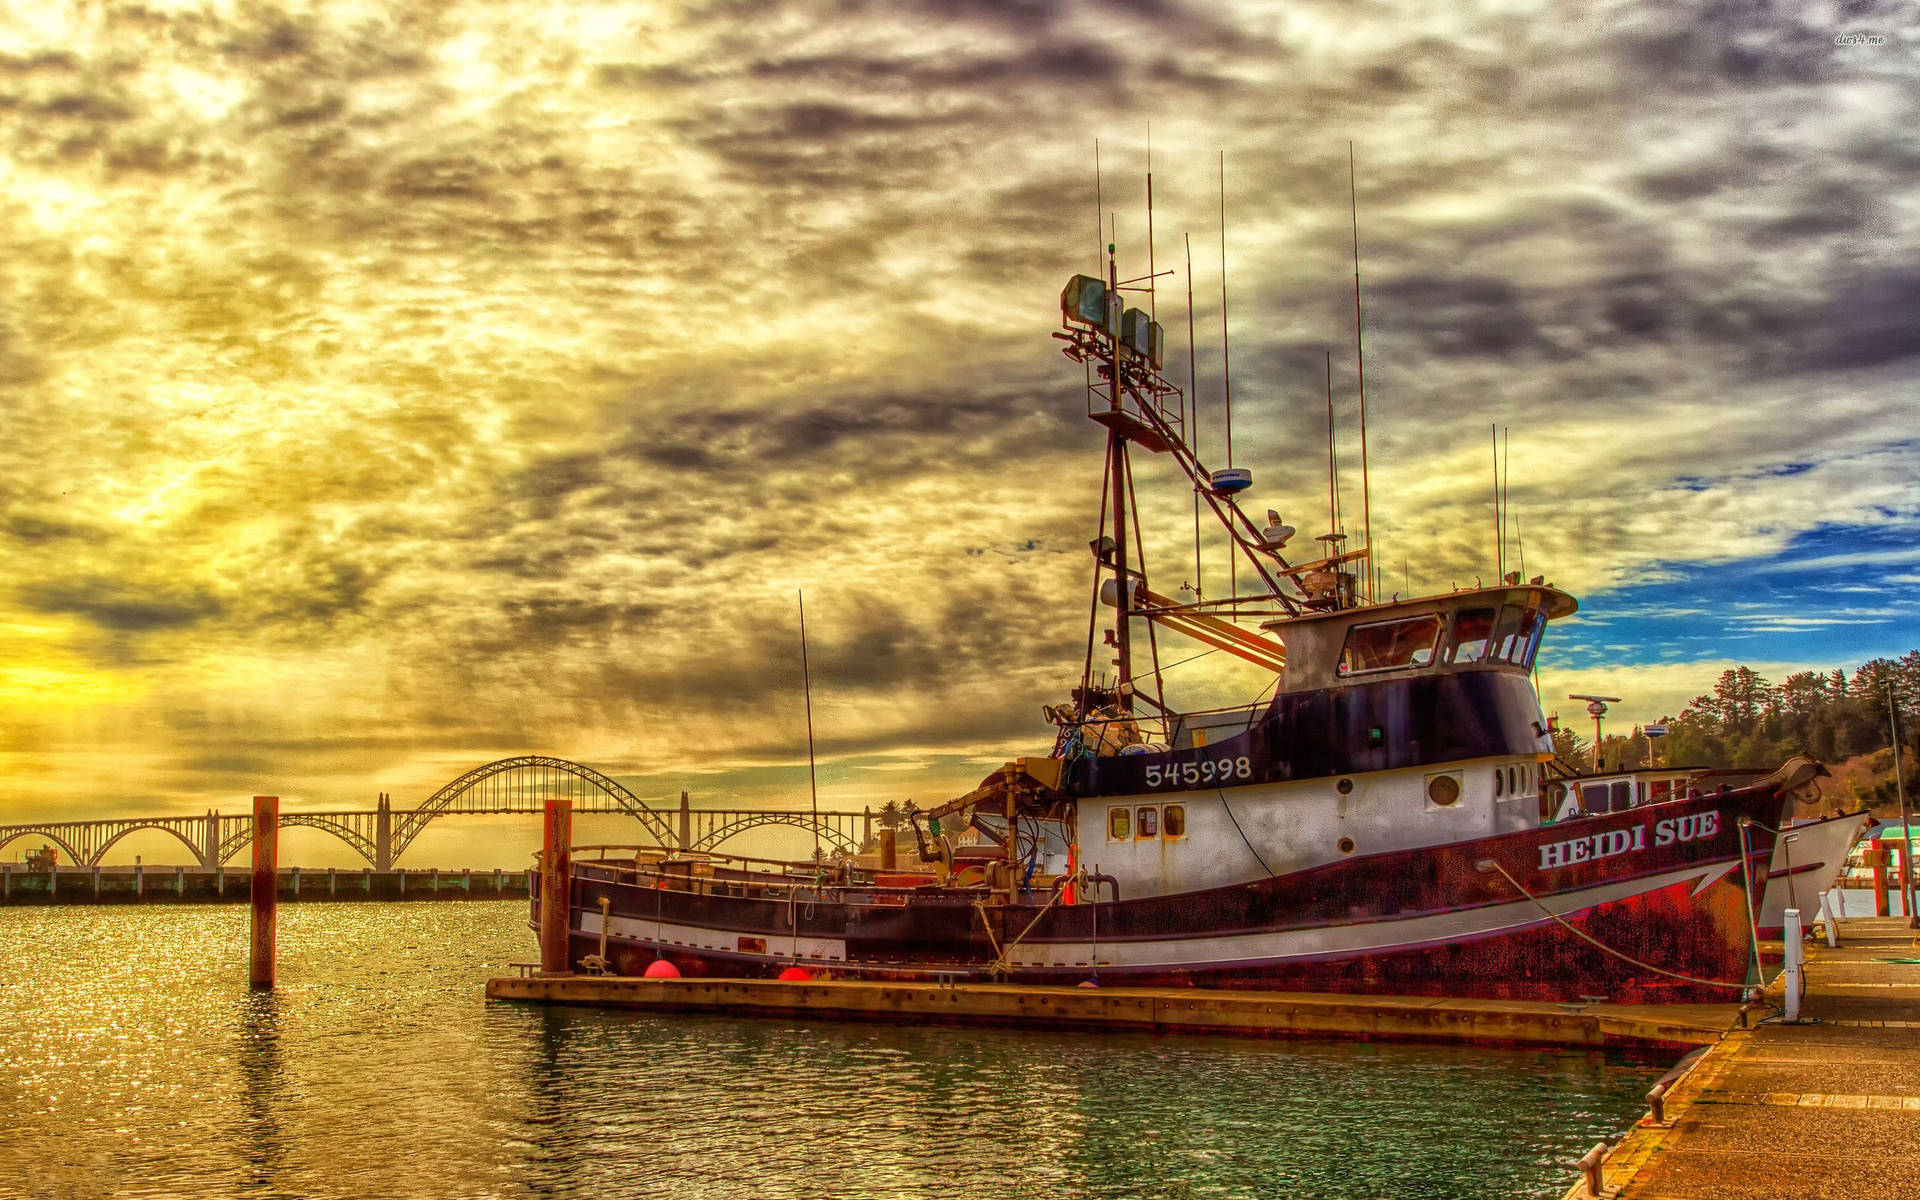 Large Fishing Boat In The Harbor